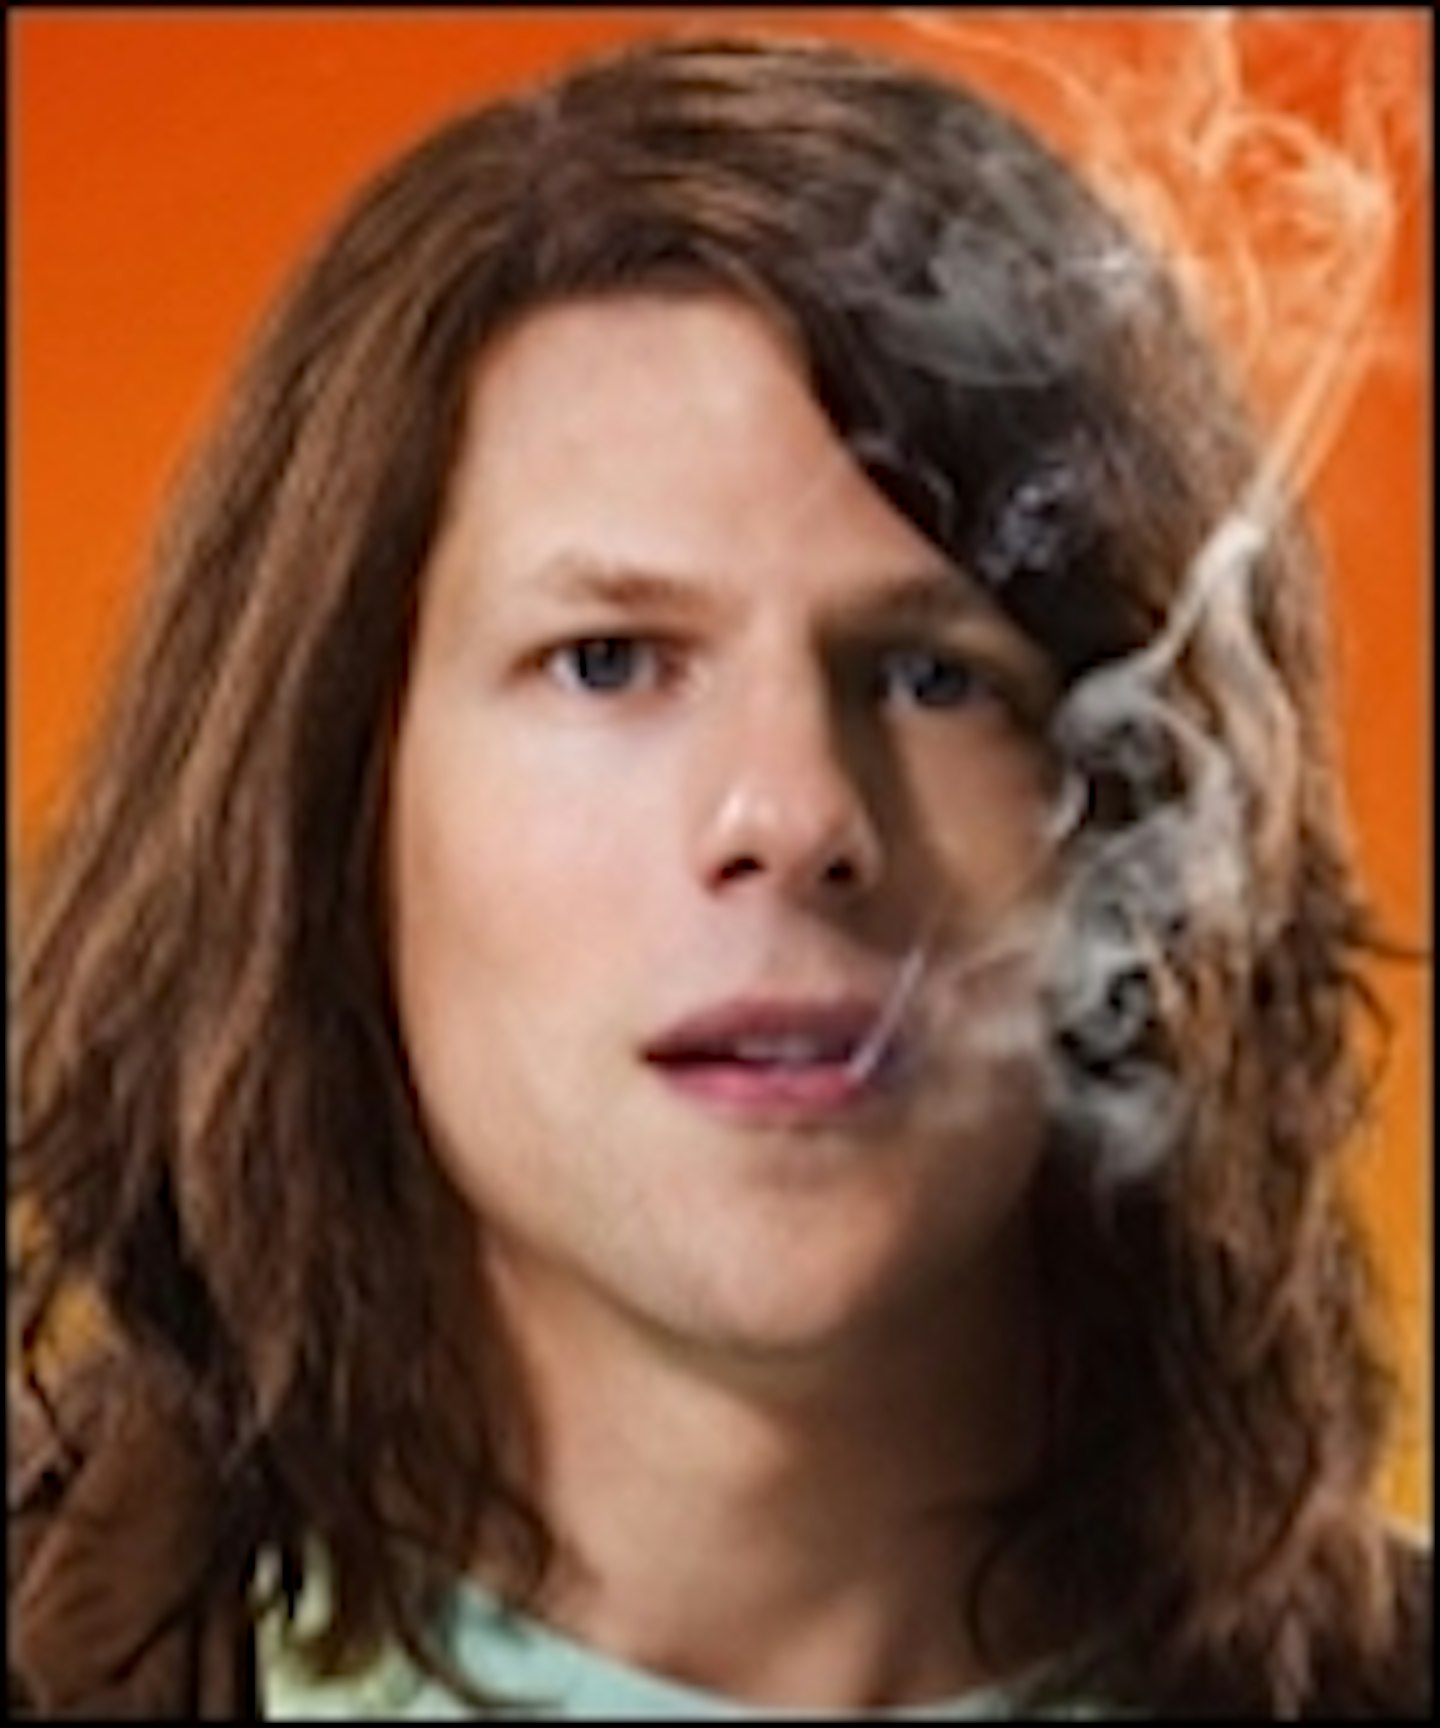 American Ultra Red Band Trailer Shoots Online